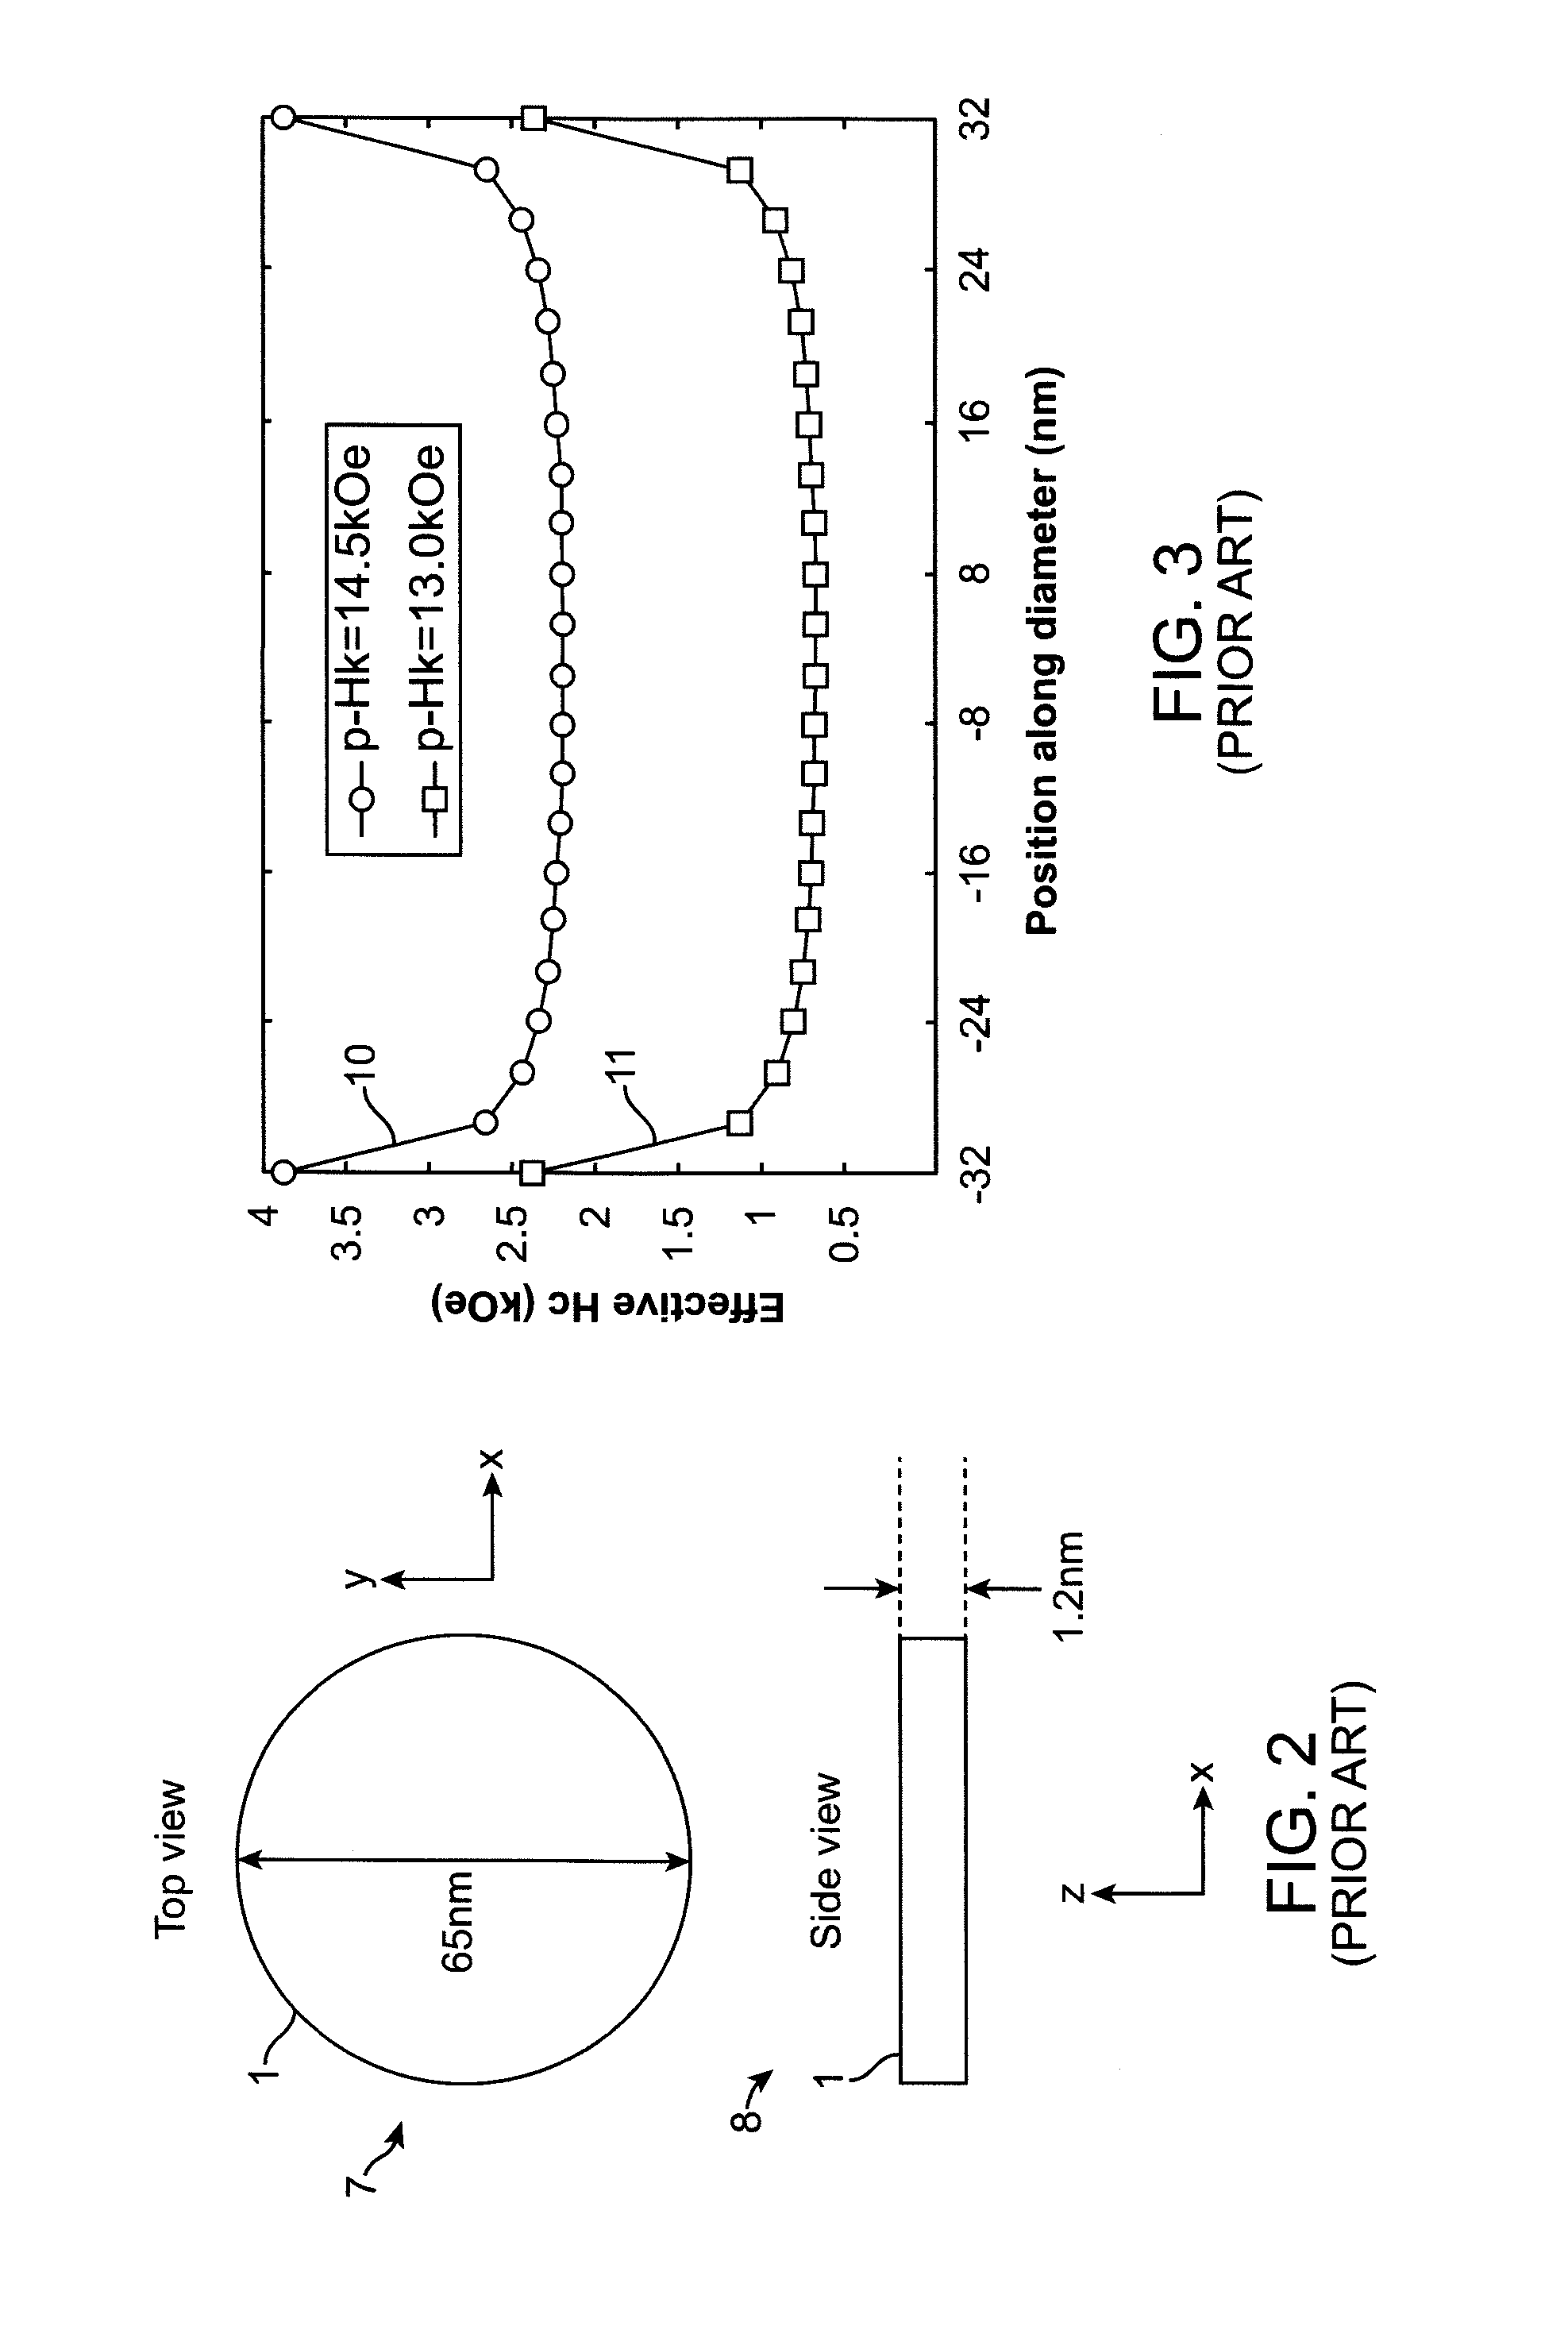 Perpendicular sttmram device with balanced reference layer